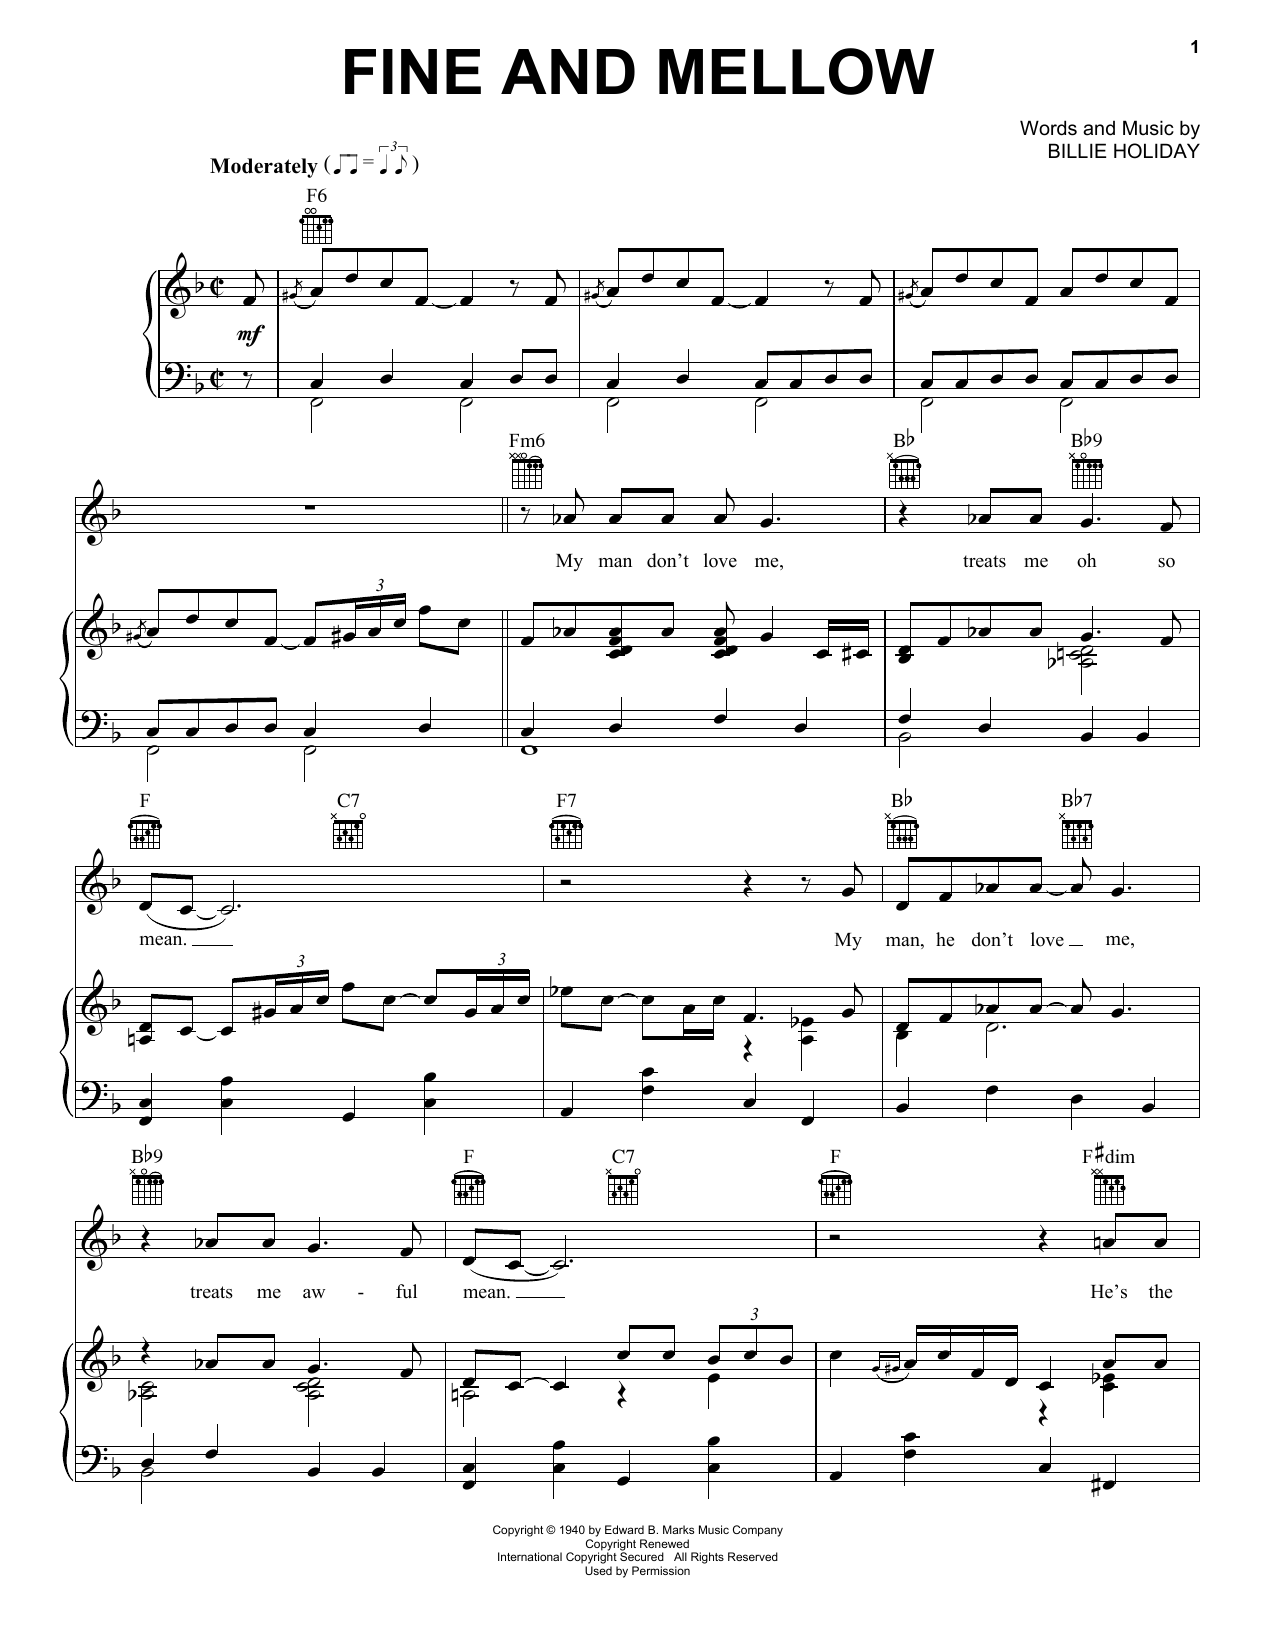 Billie Holiday Fine And Mellow sheet music notes and chords. Download Printable PDF.